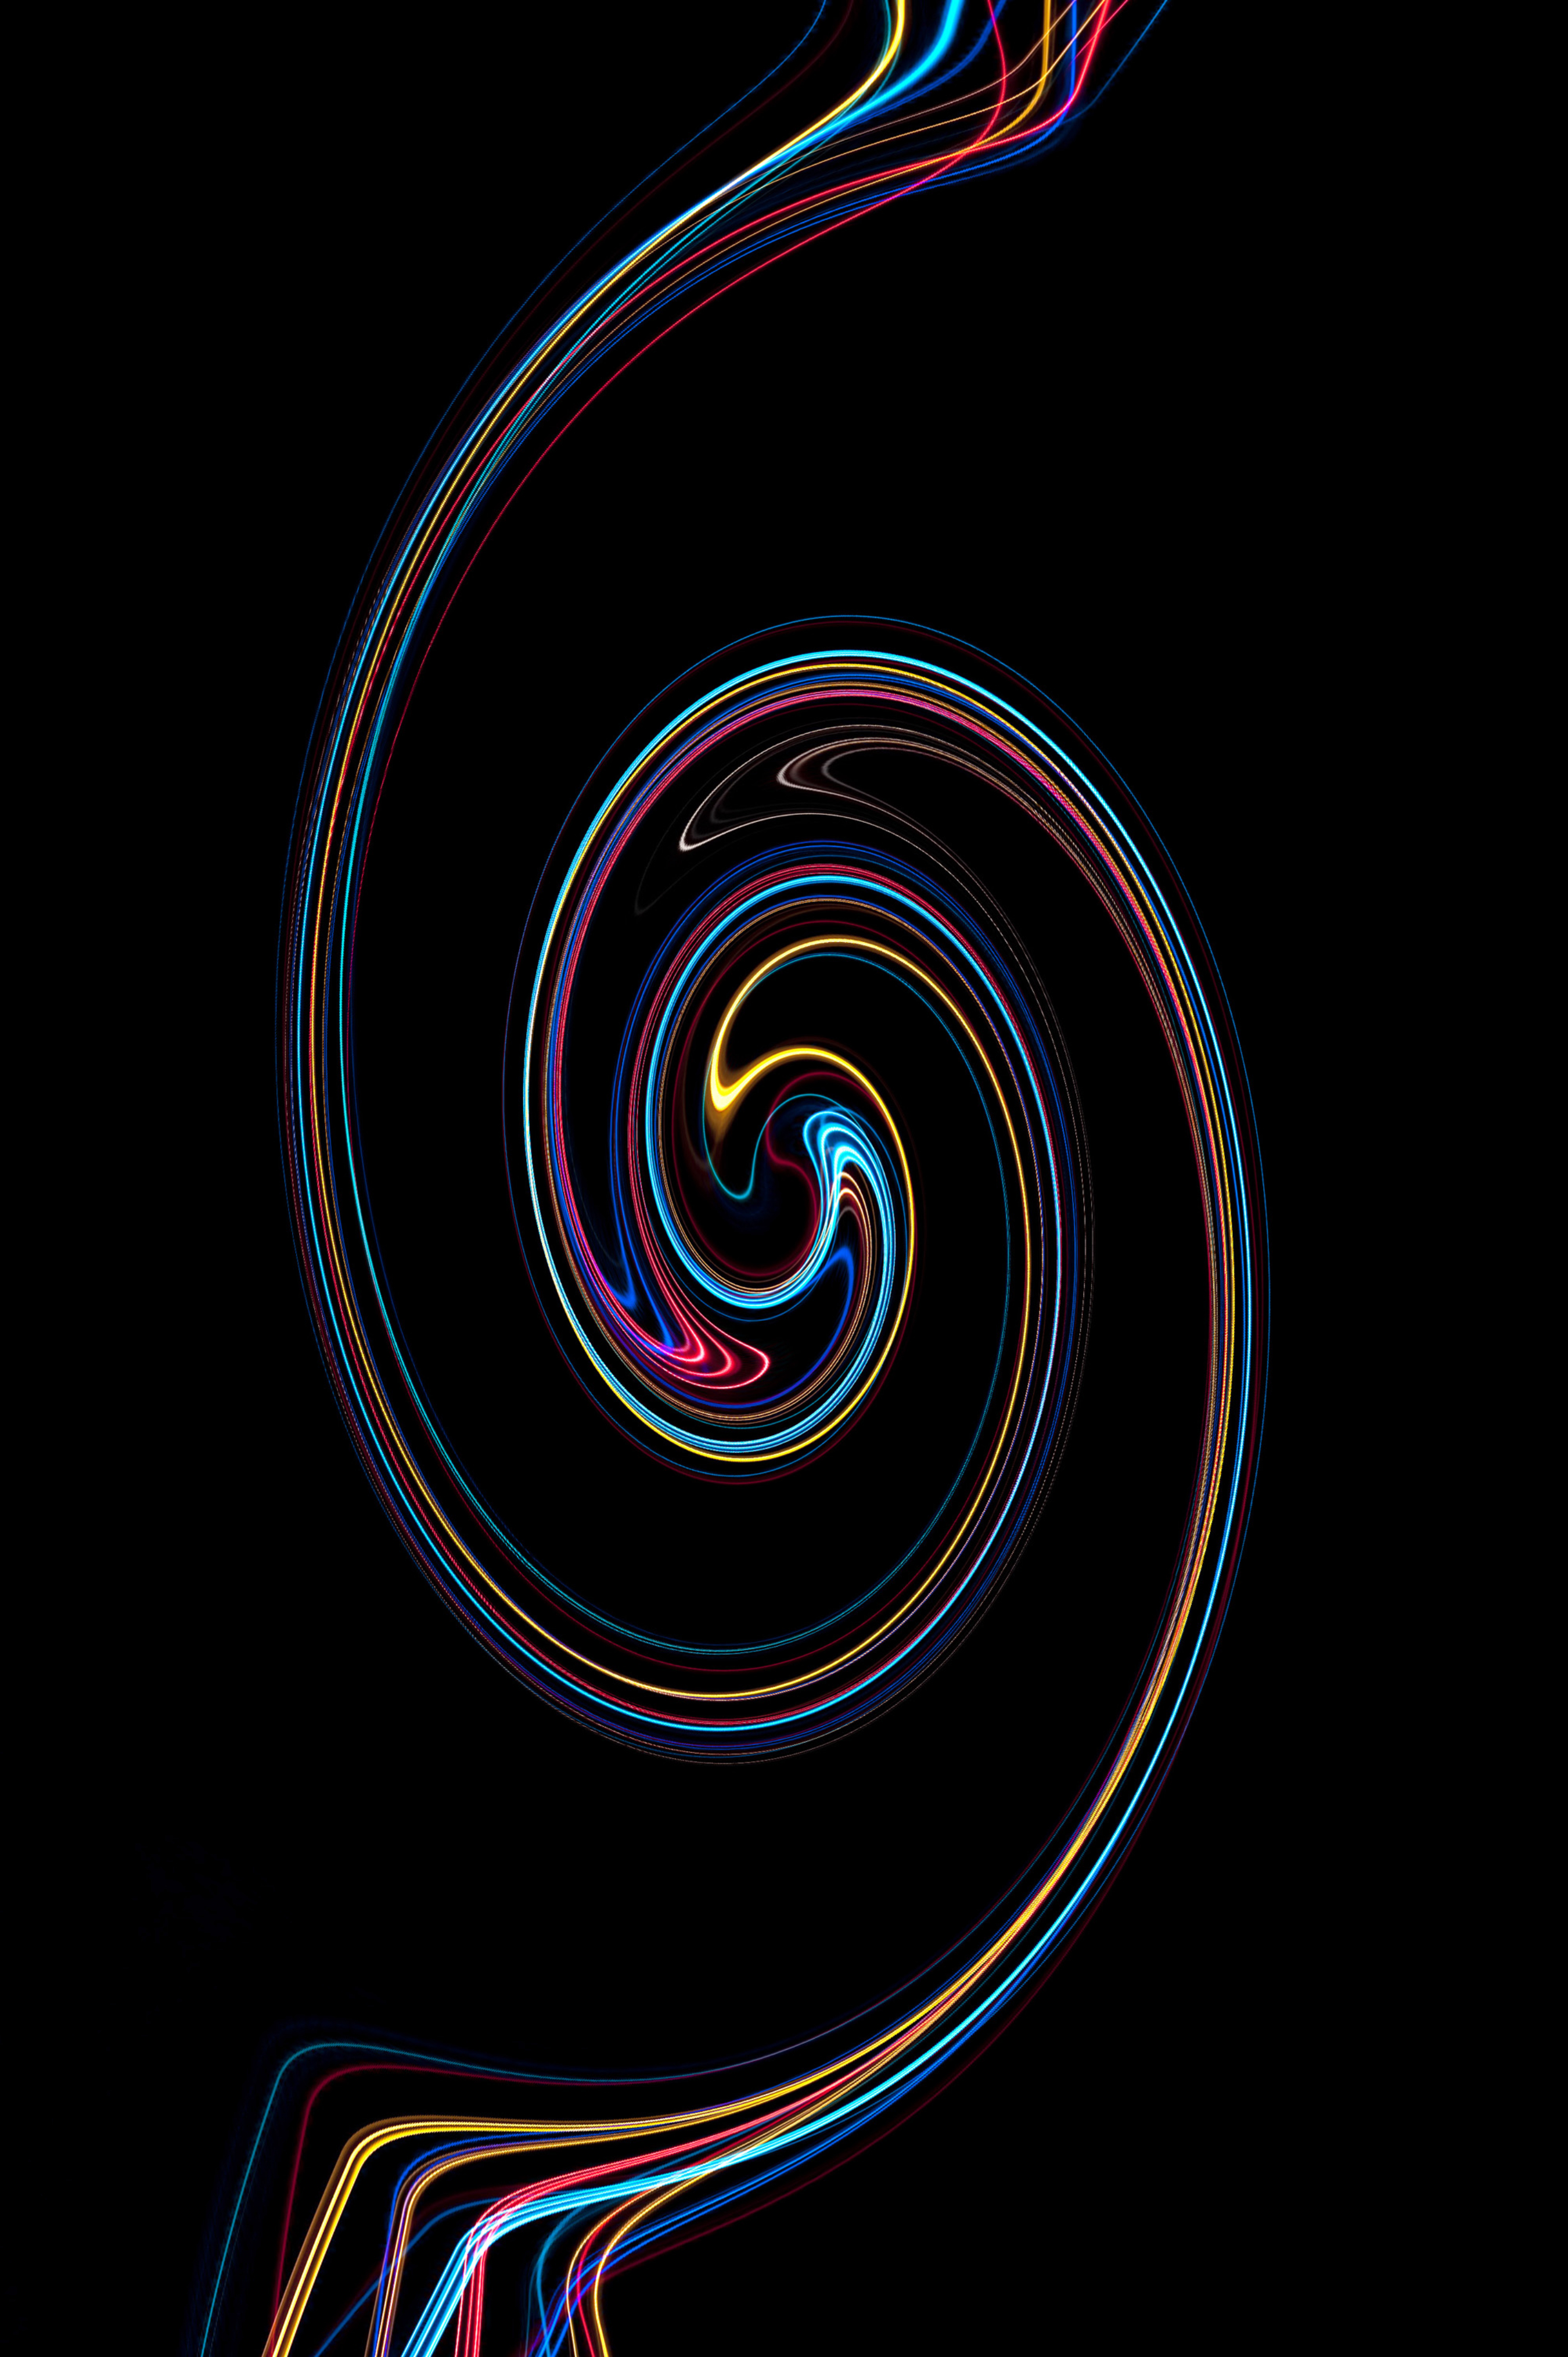 spiral, abstract, lines, multicolored, motley, swirling, involute 1080p